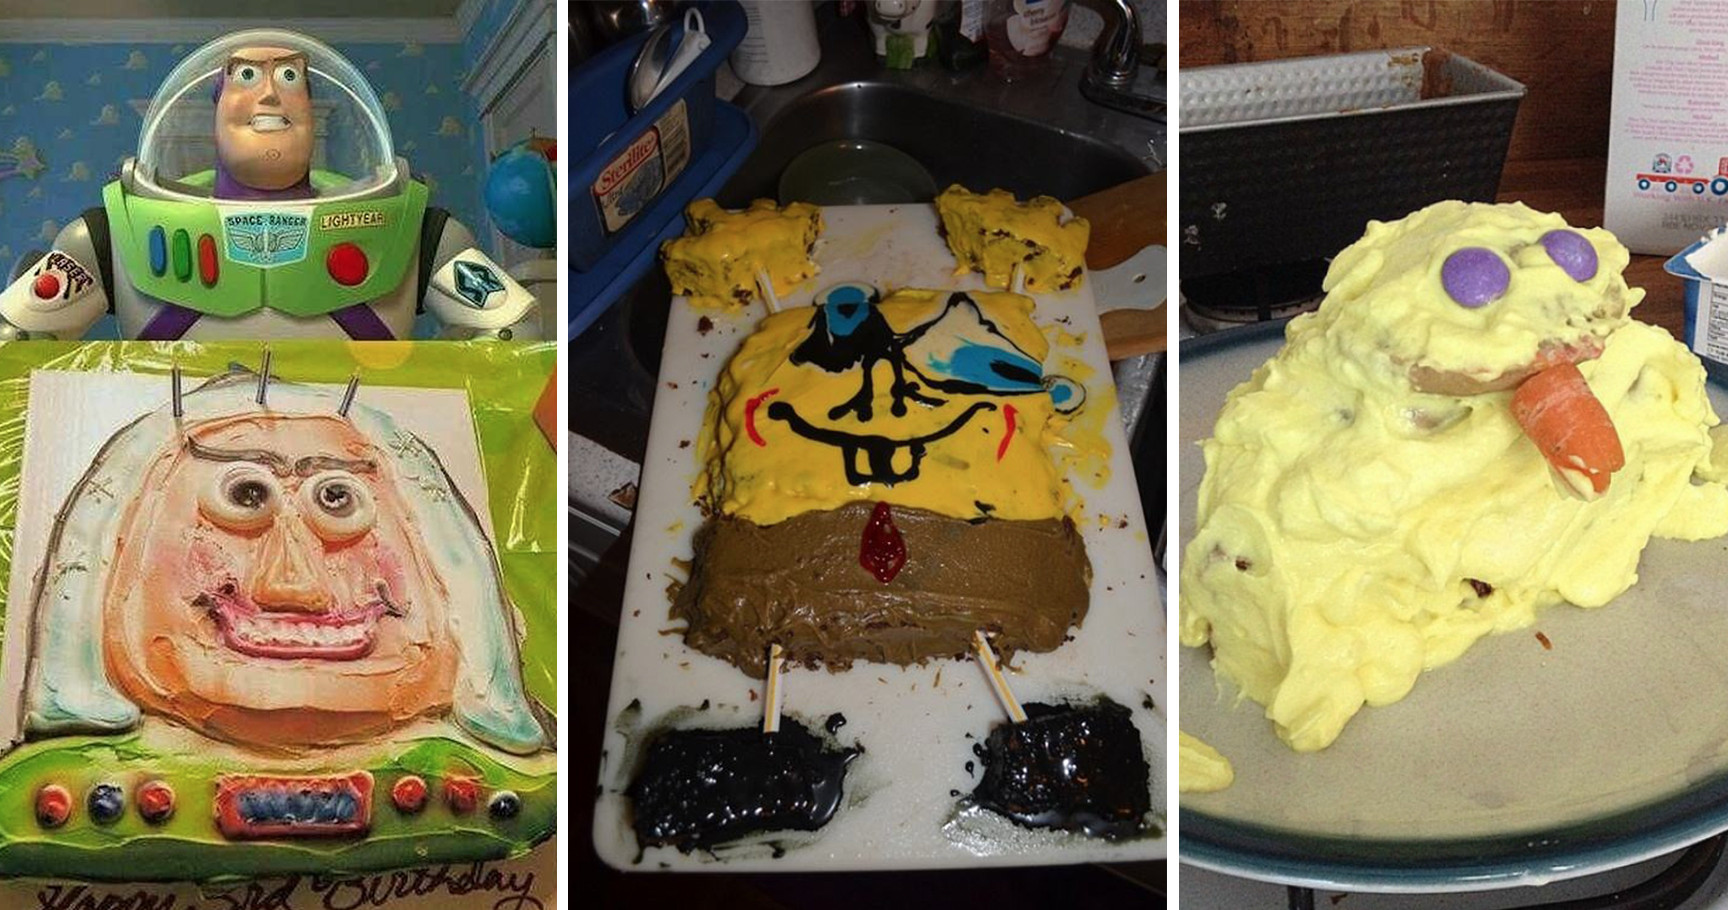 Bad Birthday Cakes
 15 Birthday Cake Fails So Bad They Would Make You Cry